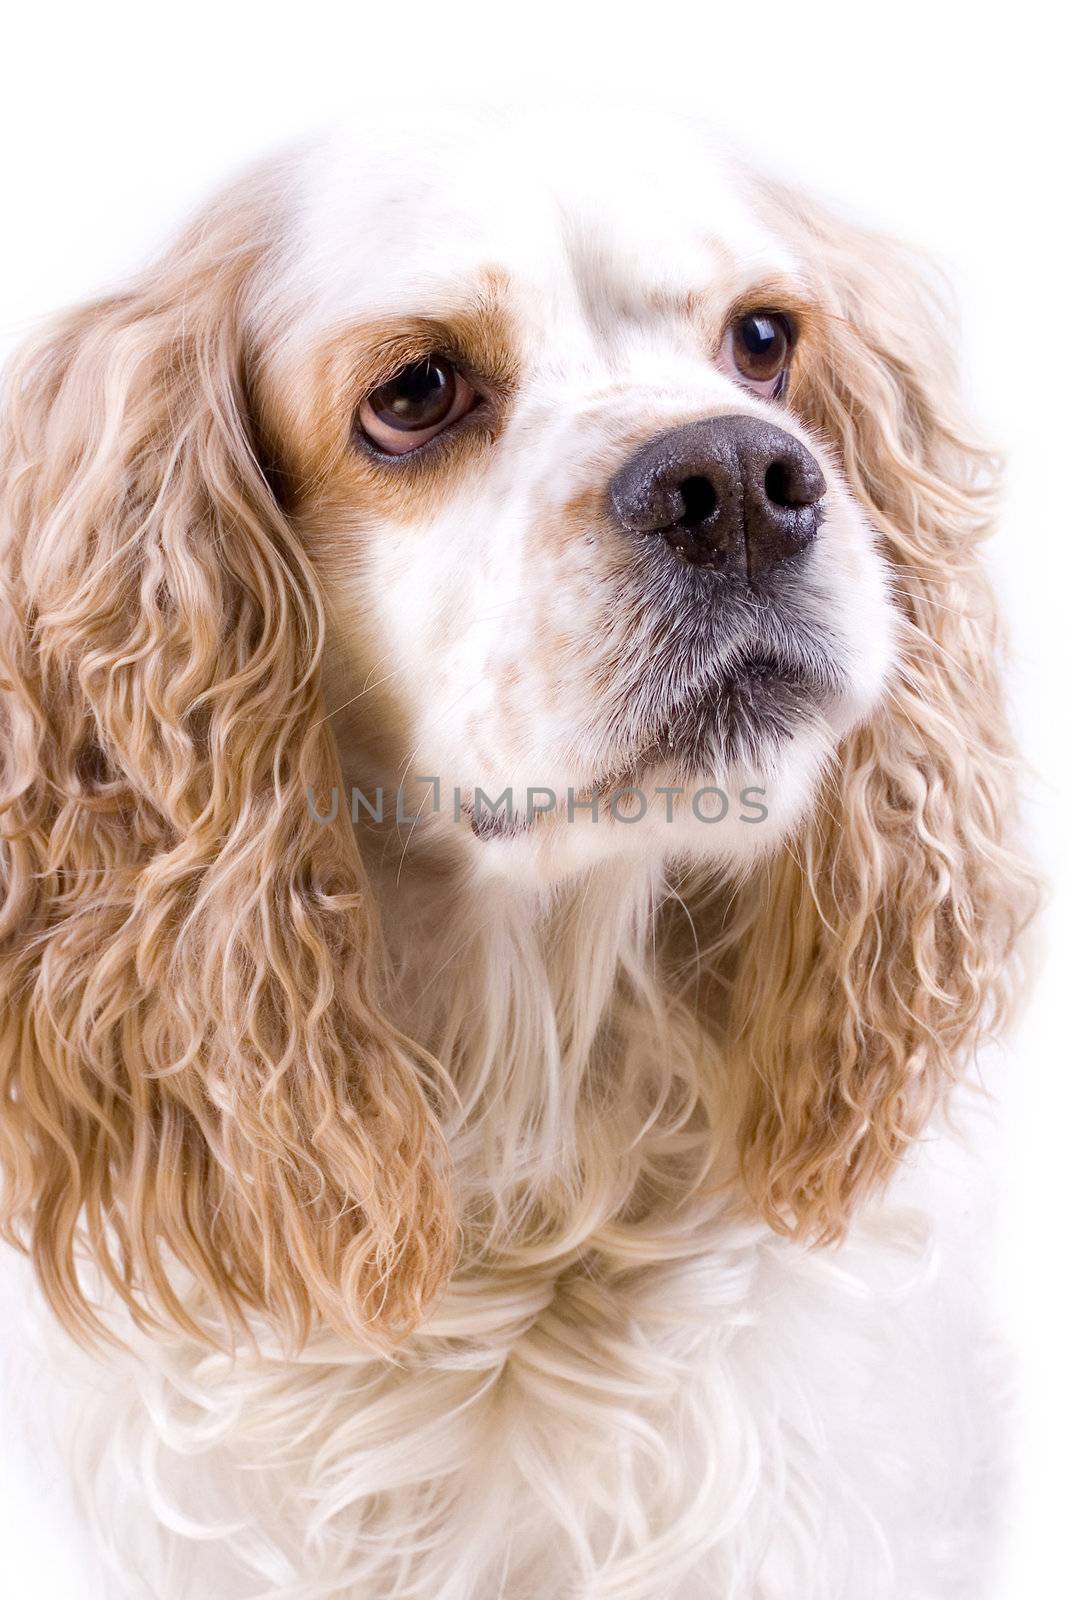 cute playful dog on a white background